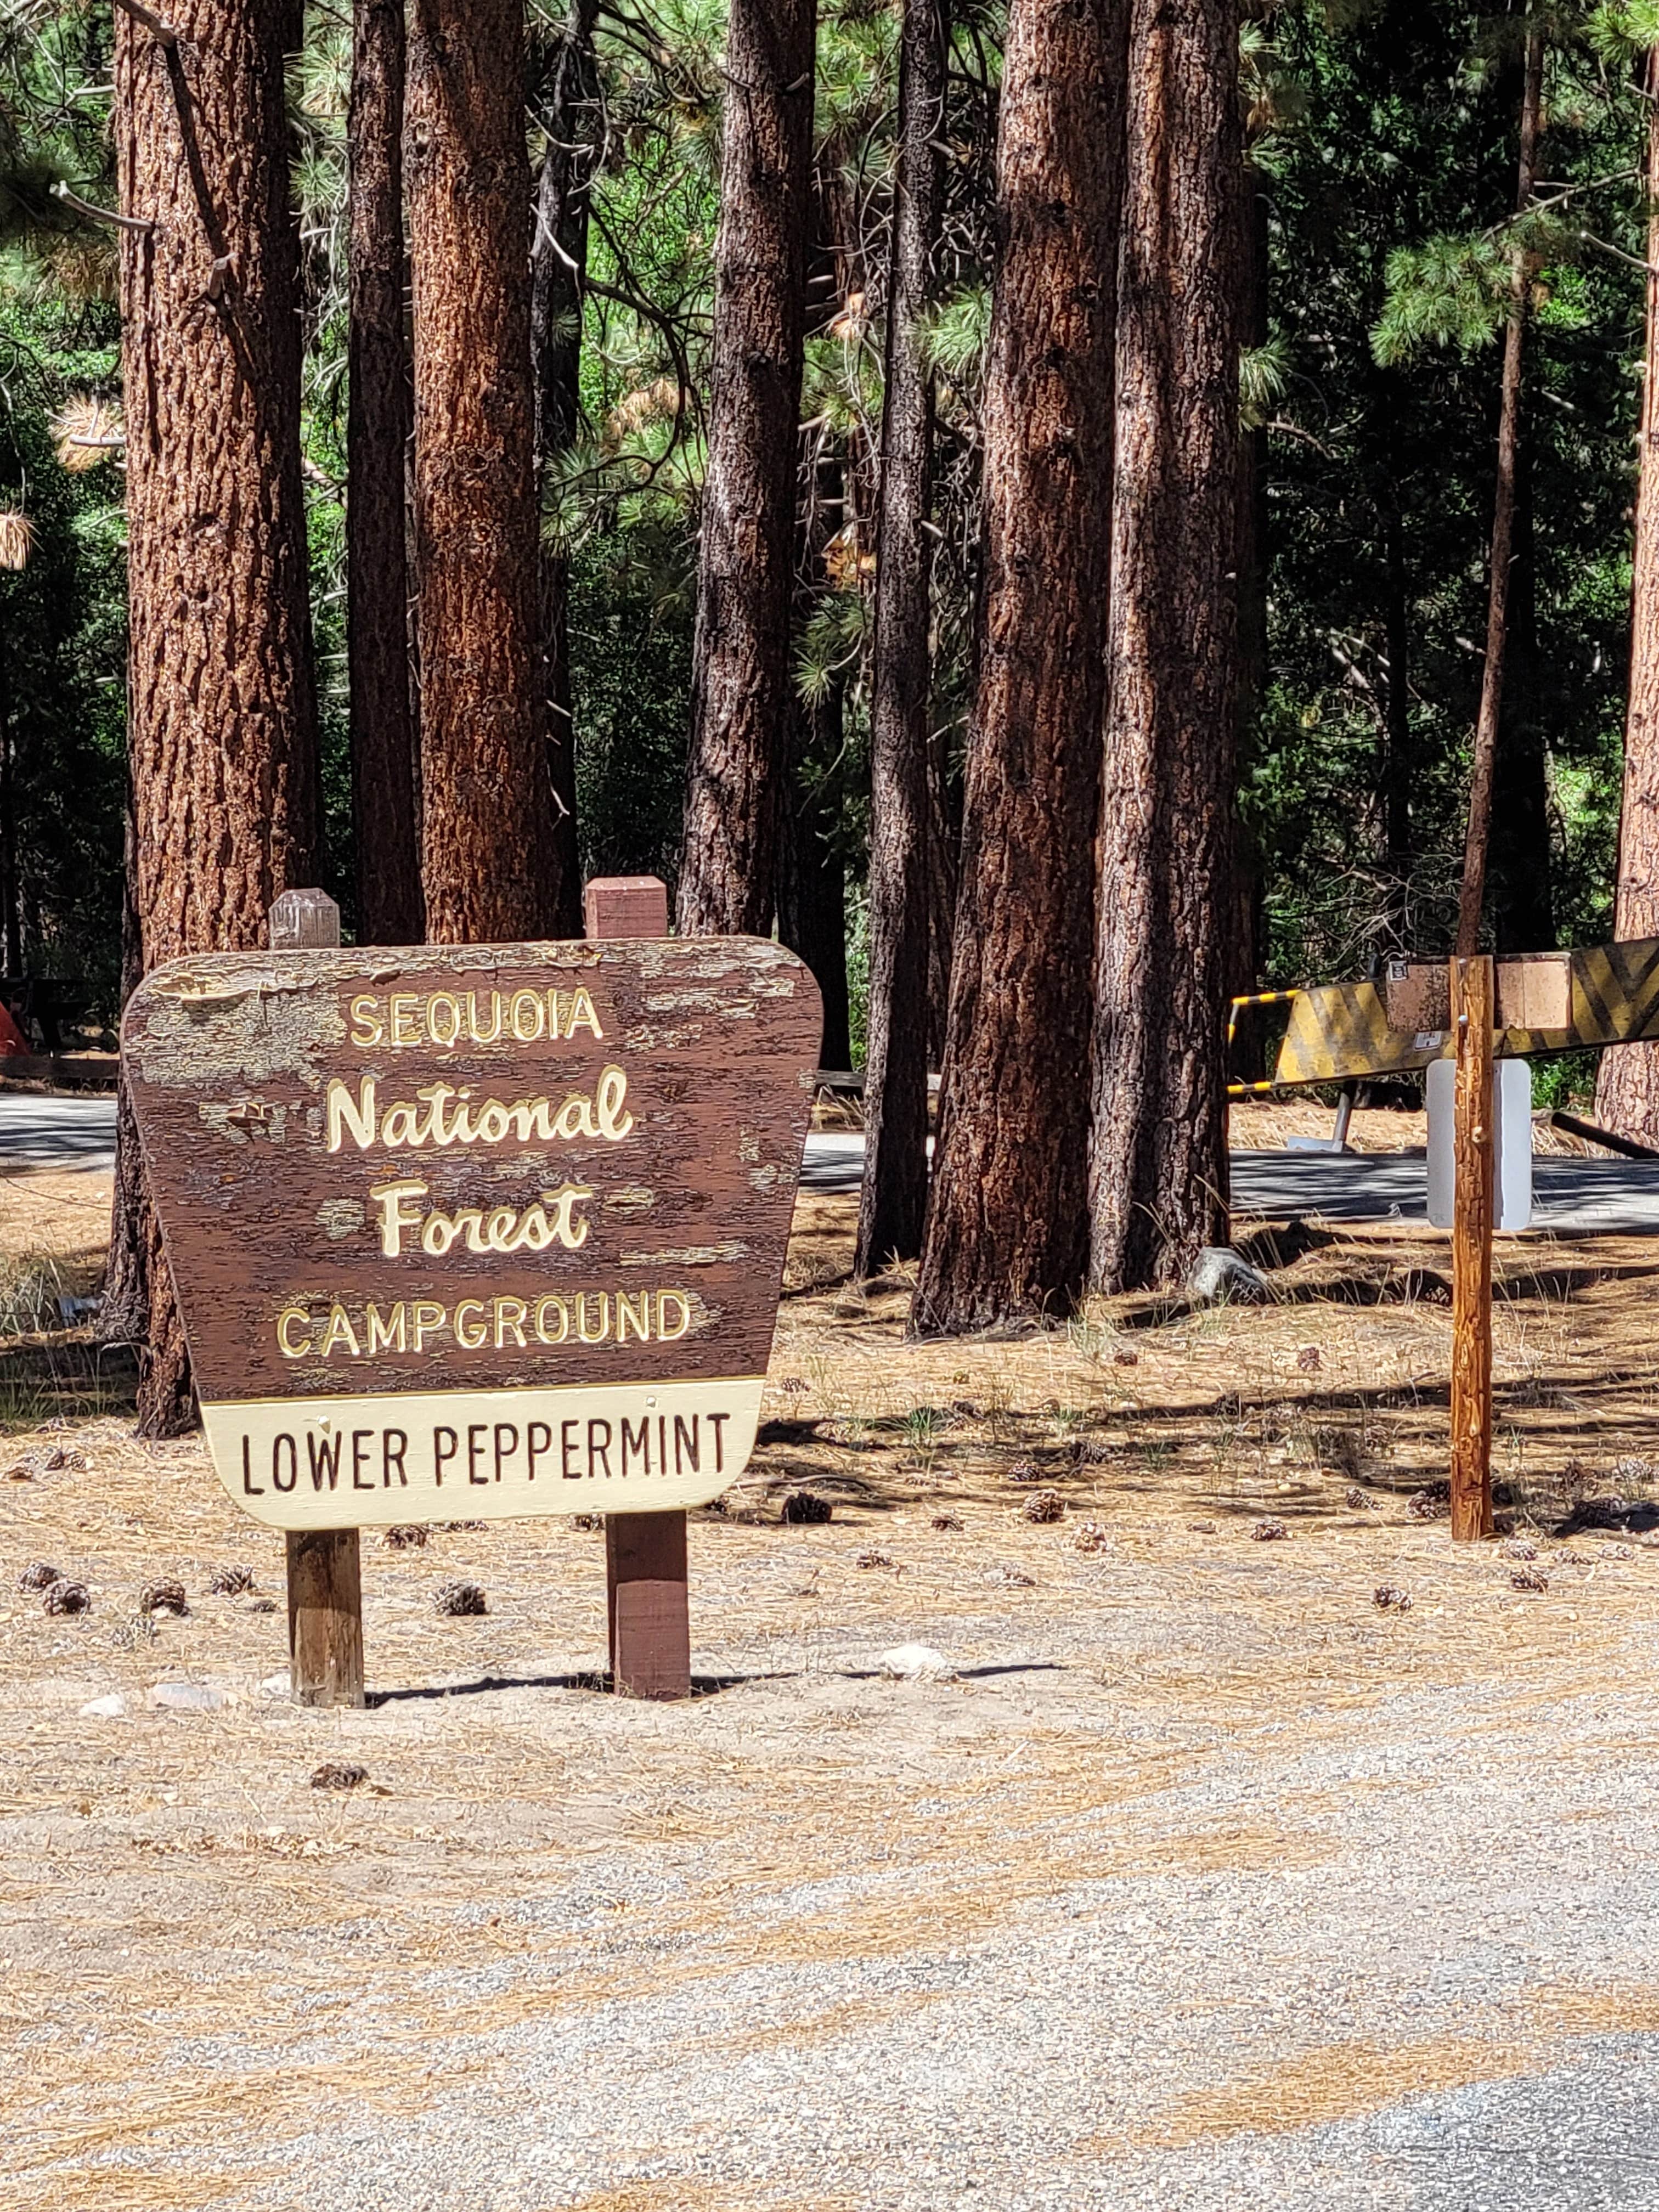 Camper submitted image from Peppermint Campground - 5